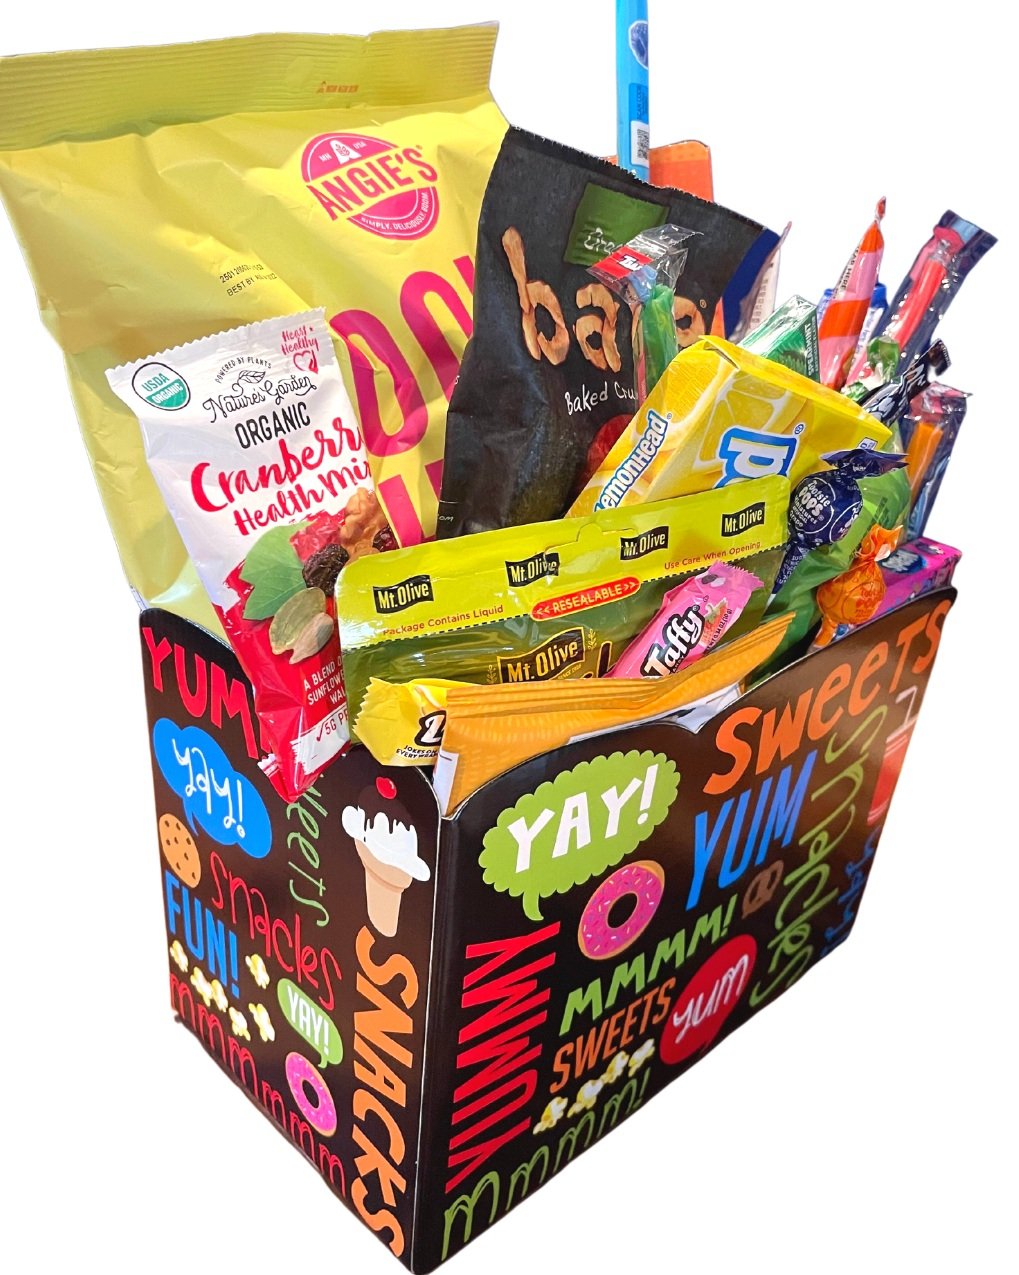 This SNACKLE box full of snacks - HayleyCakes and Cookies